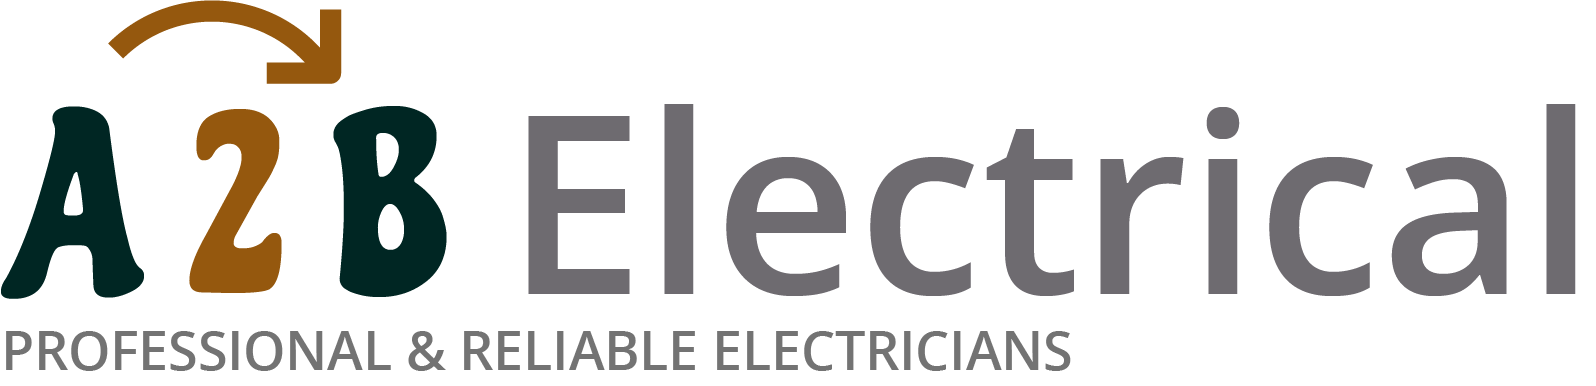 If you have electrical wiring problems in Bicester, we can provide an electrician to have a look for you. 